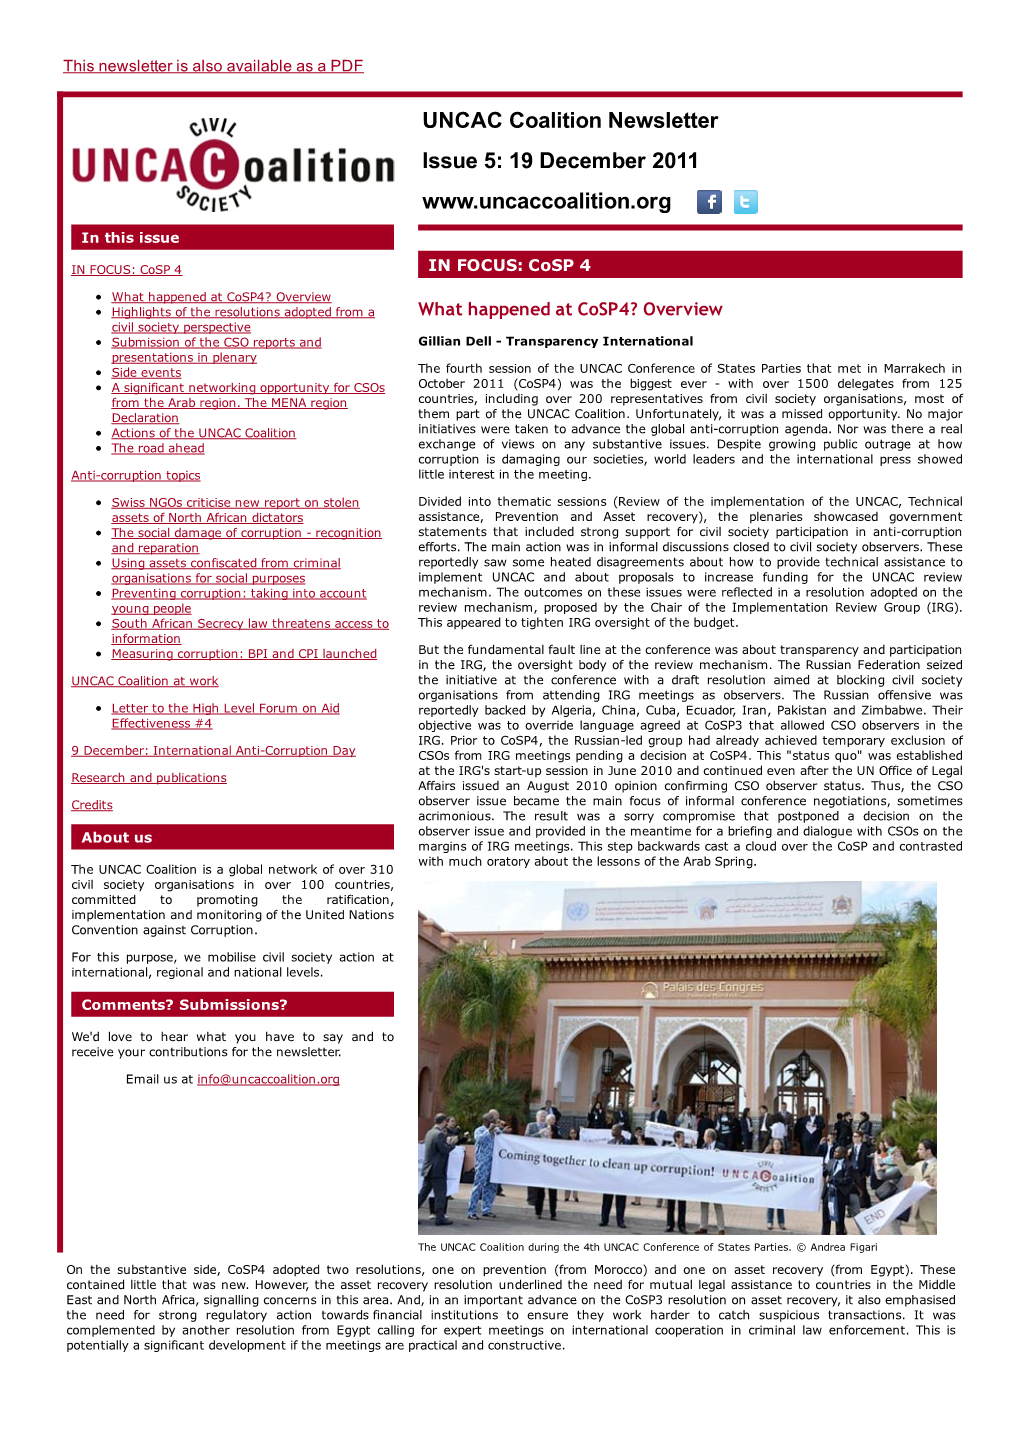 UNCAC Coalition Newsletter Issue 5: 19 December 2011